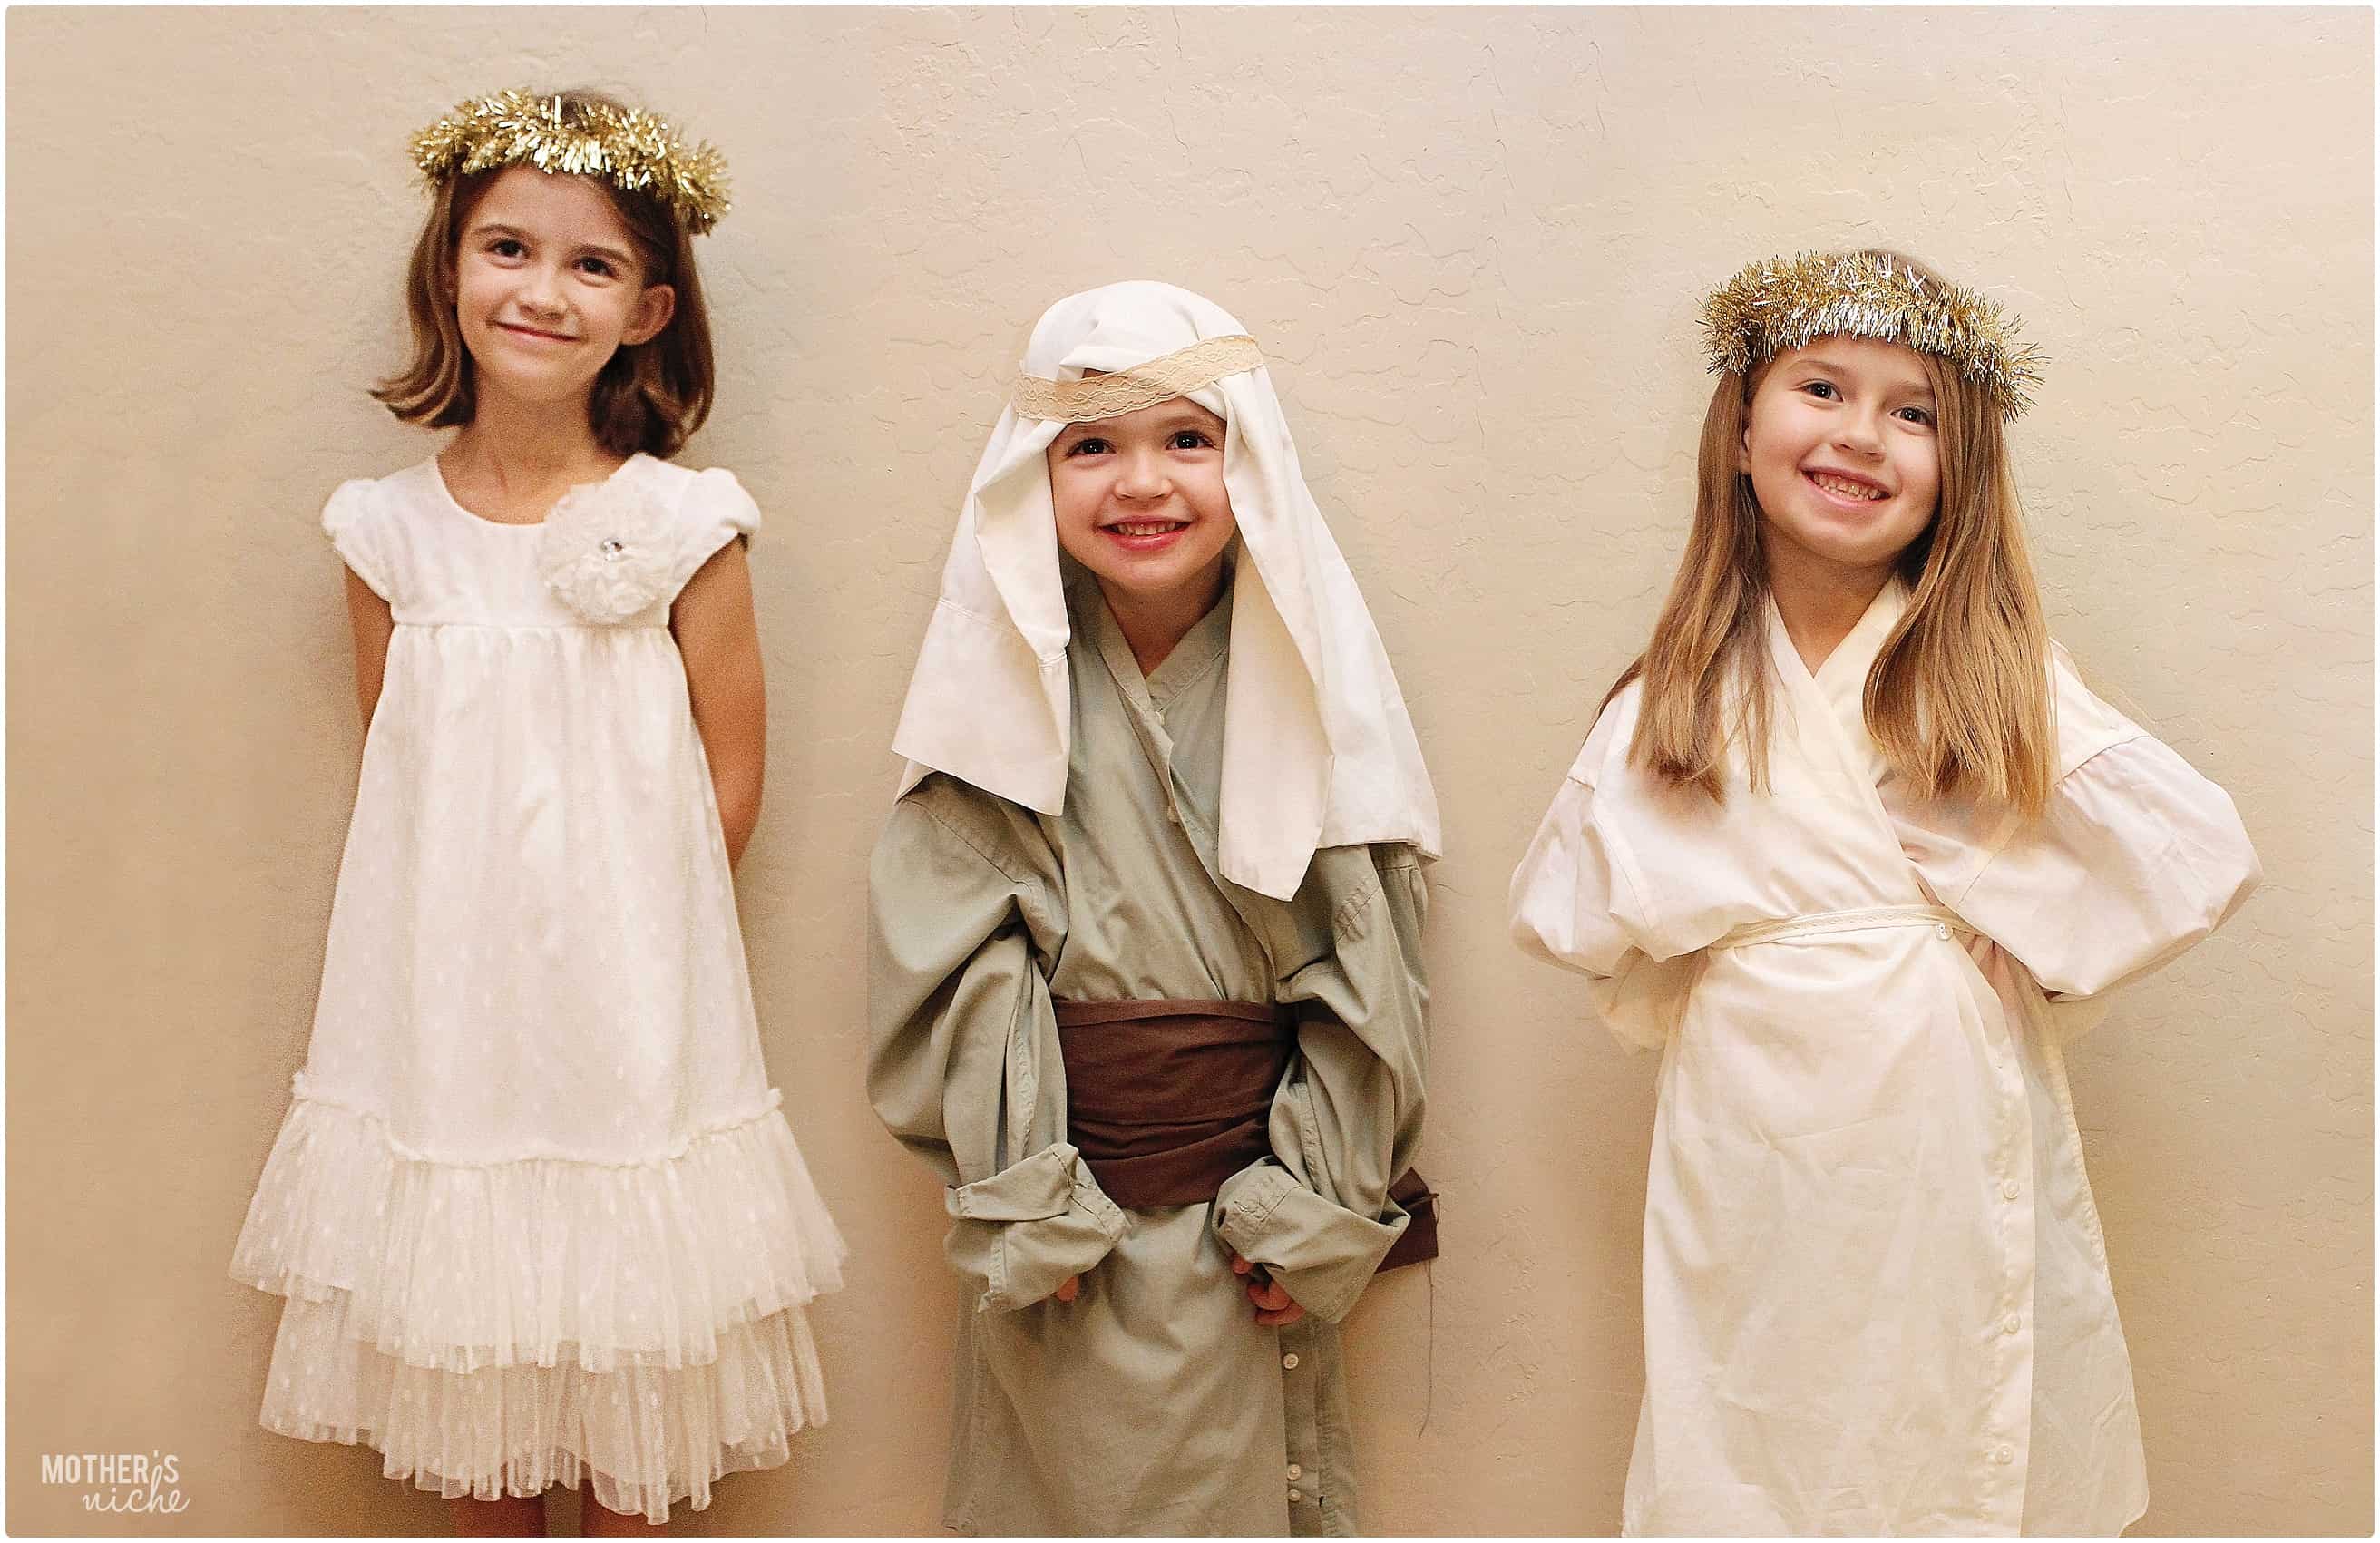 Act out the Nativity story